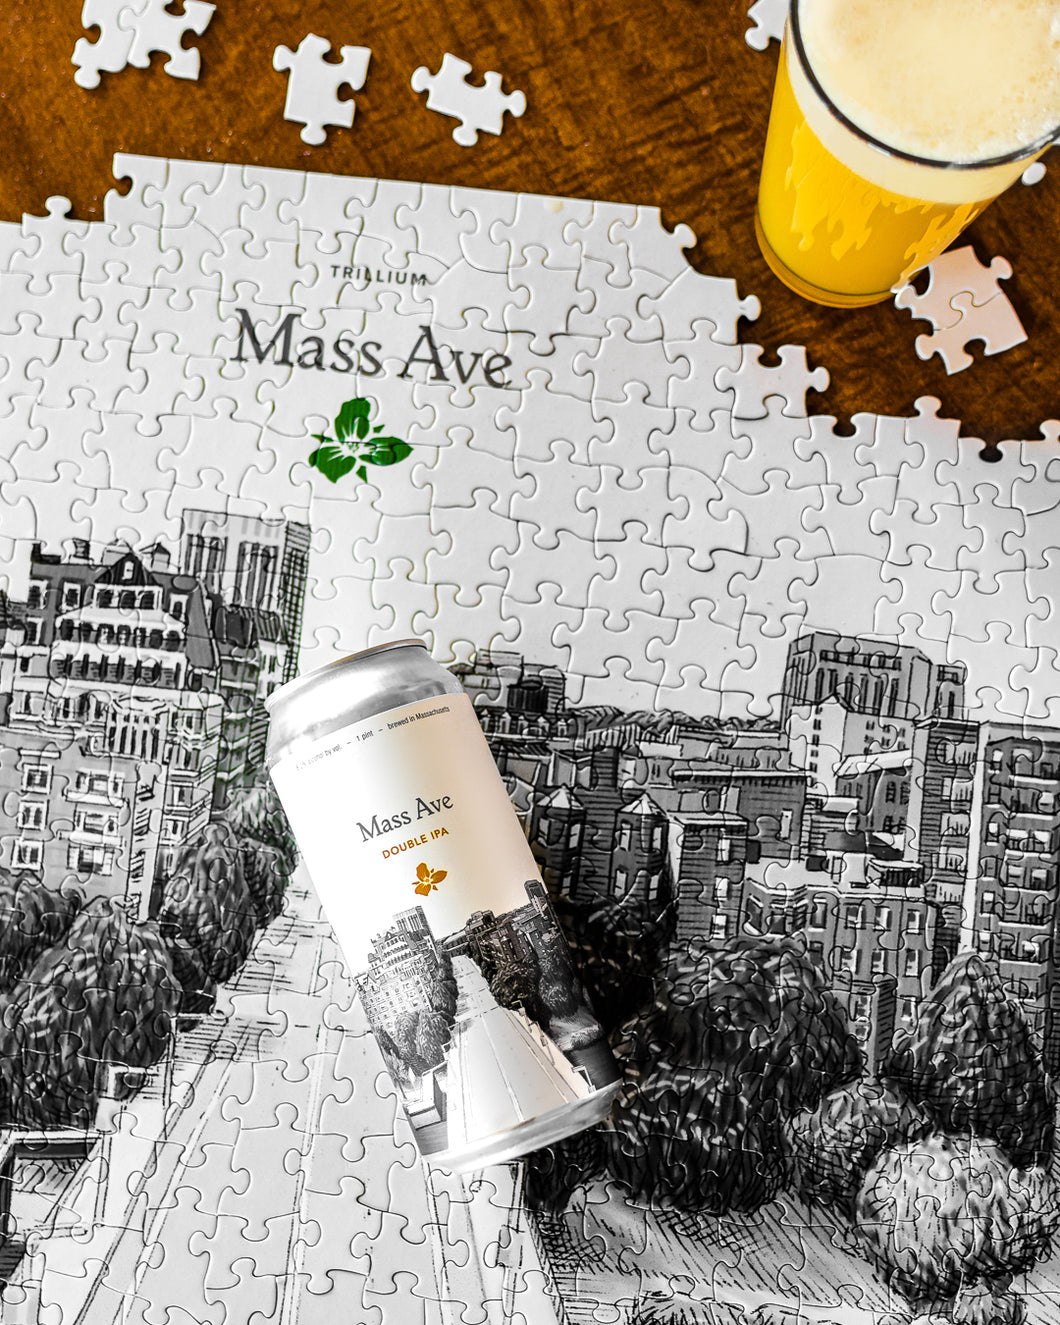 Puzzle of Trillium's Mass Ave beer illustration with glass of beer and beer can on the puzzle